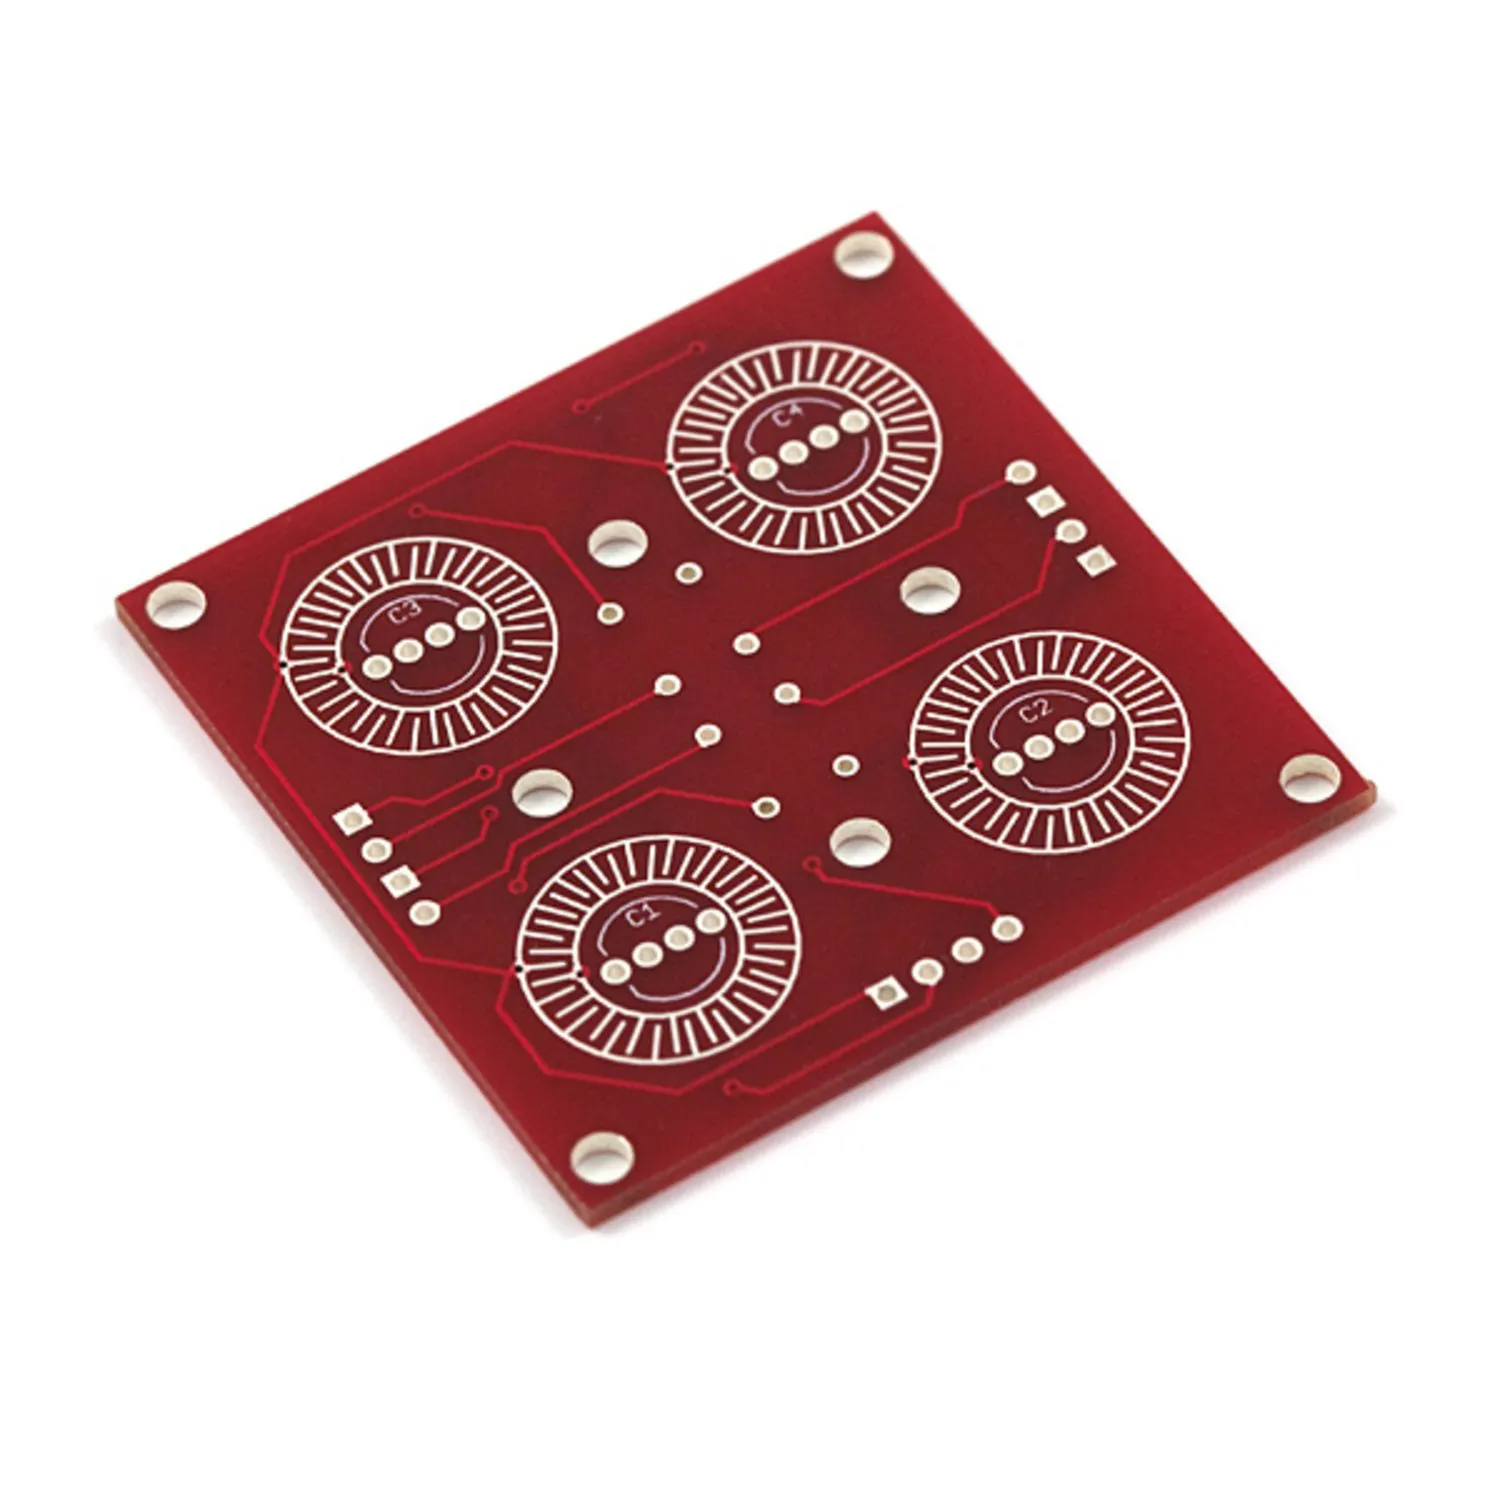 Photo of Button Pad 2x2 - Breakout PCB